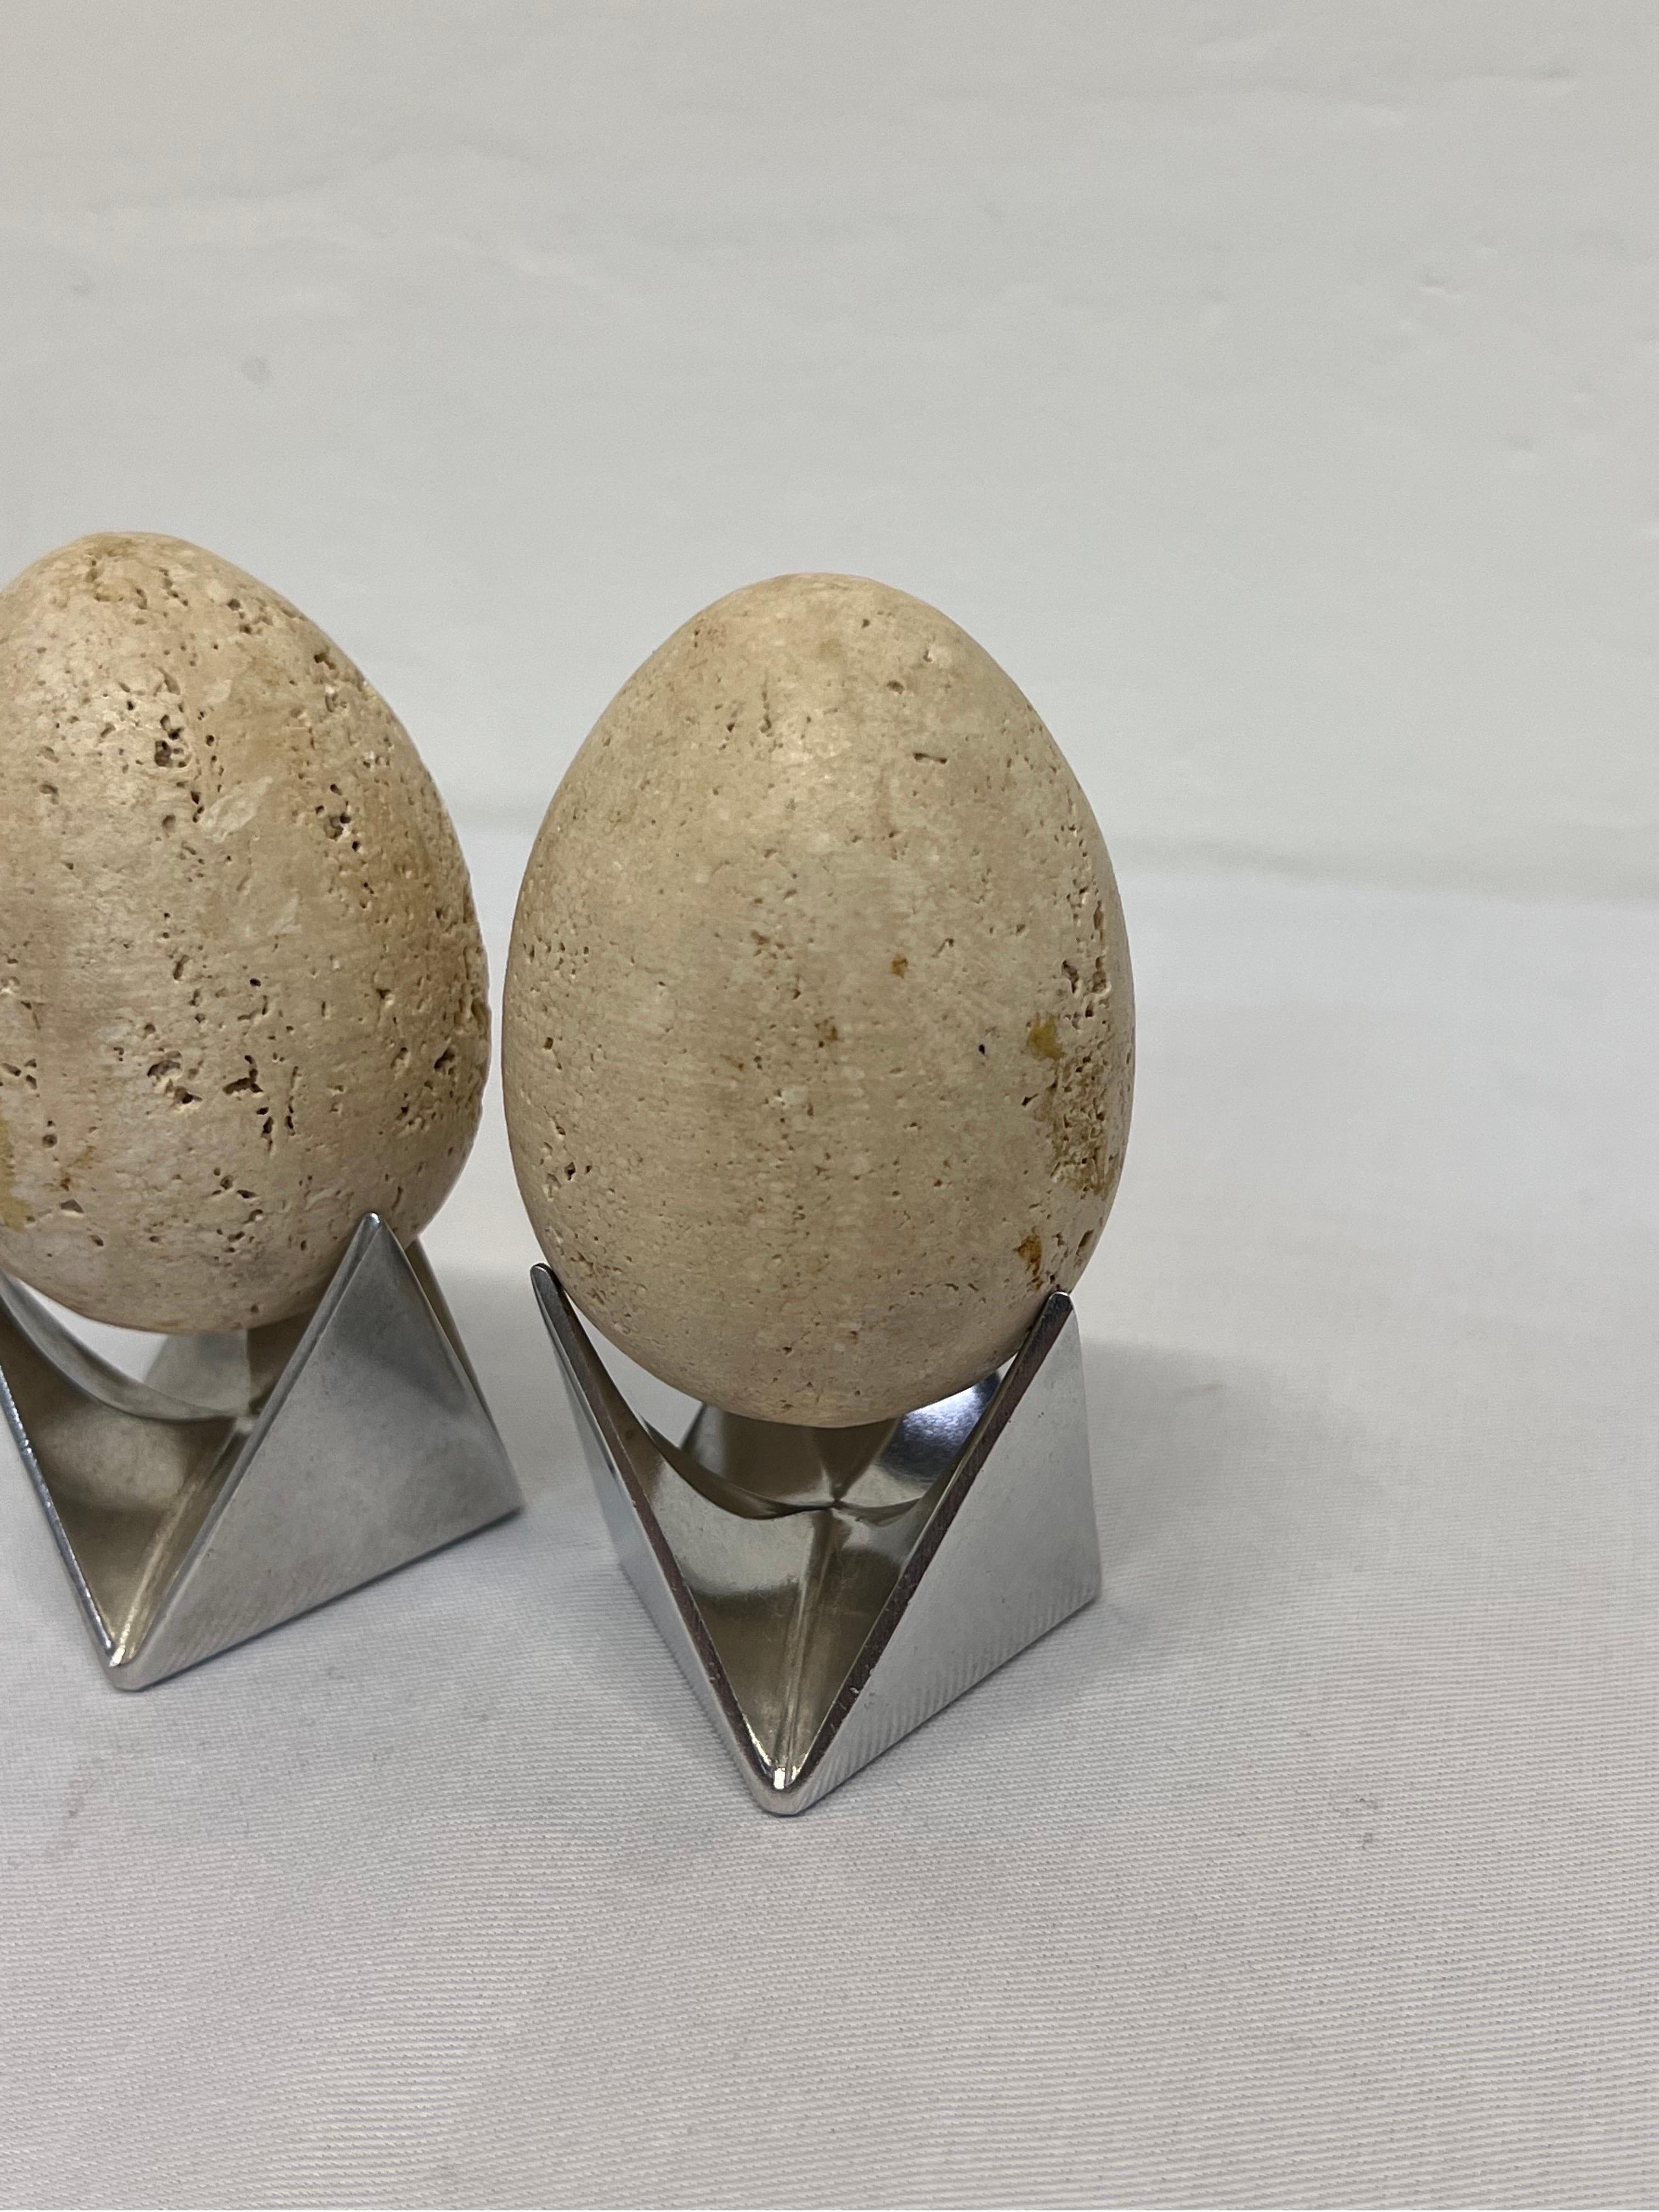 20th Century Mid-Century Travertine Egg Sculptures Atop Alessi Roost Egg Cups, a Pair For Sale